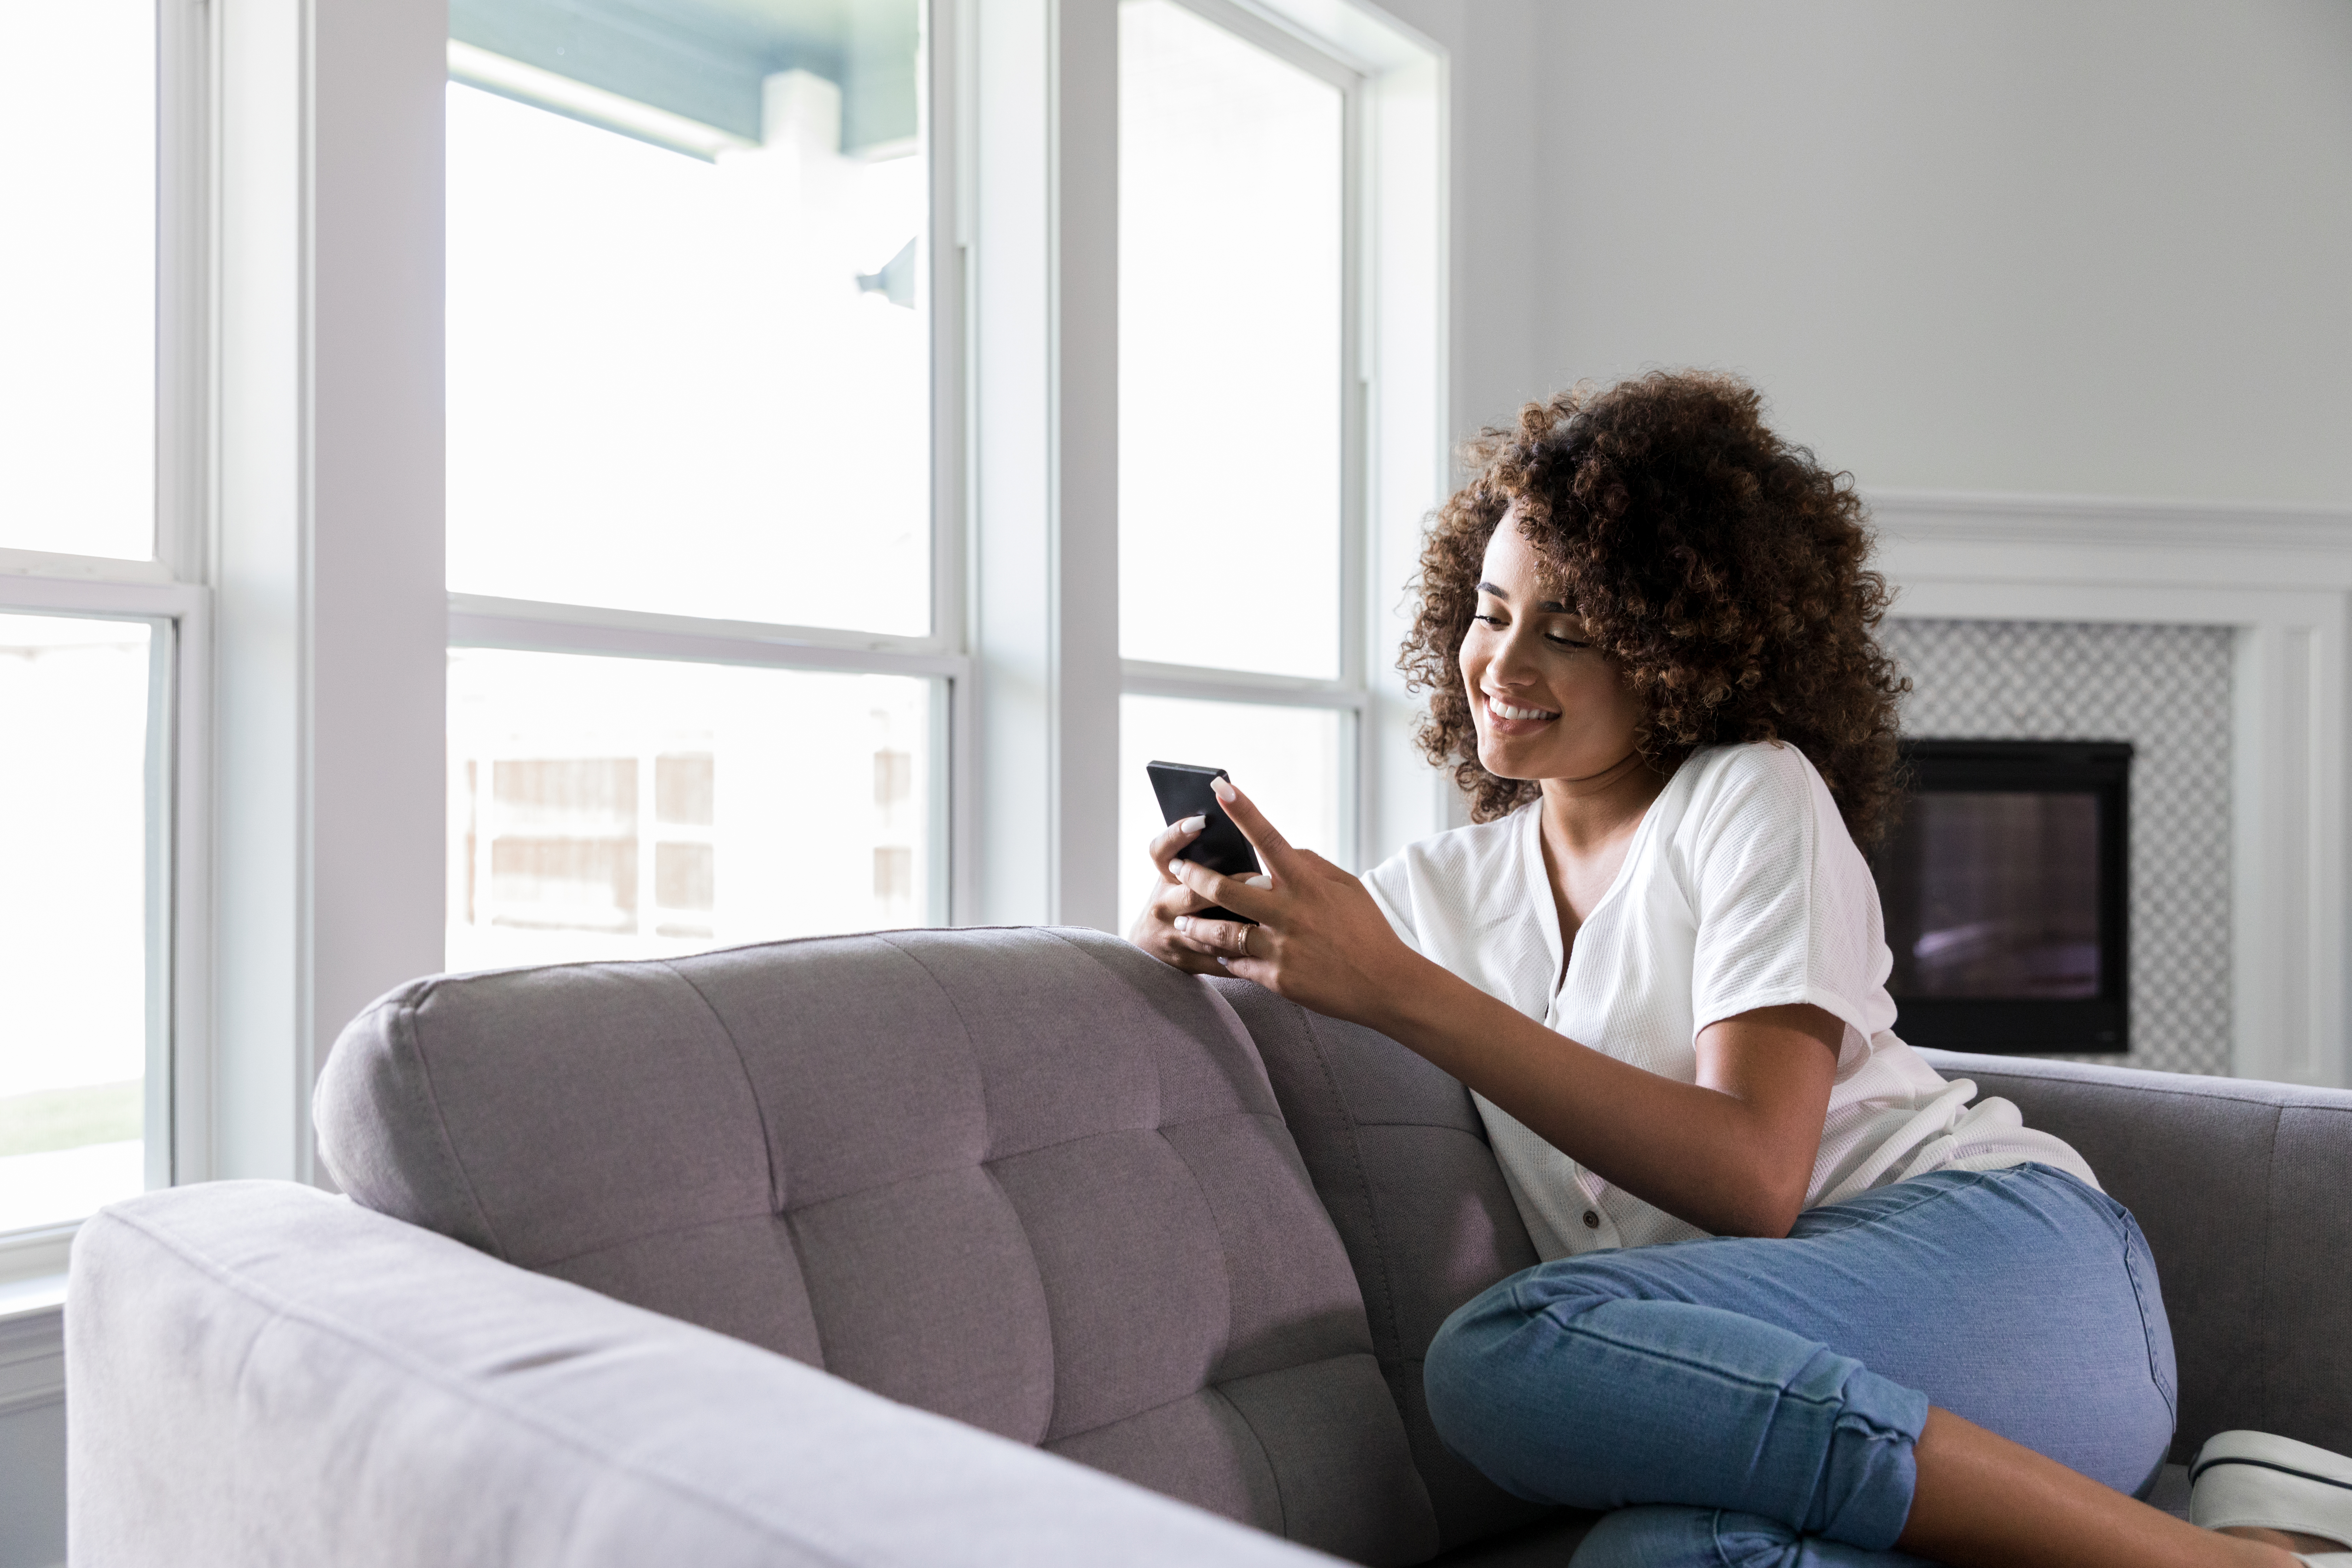 Woman Looking at Phone on Couch